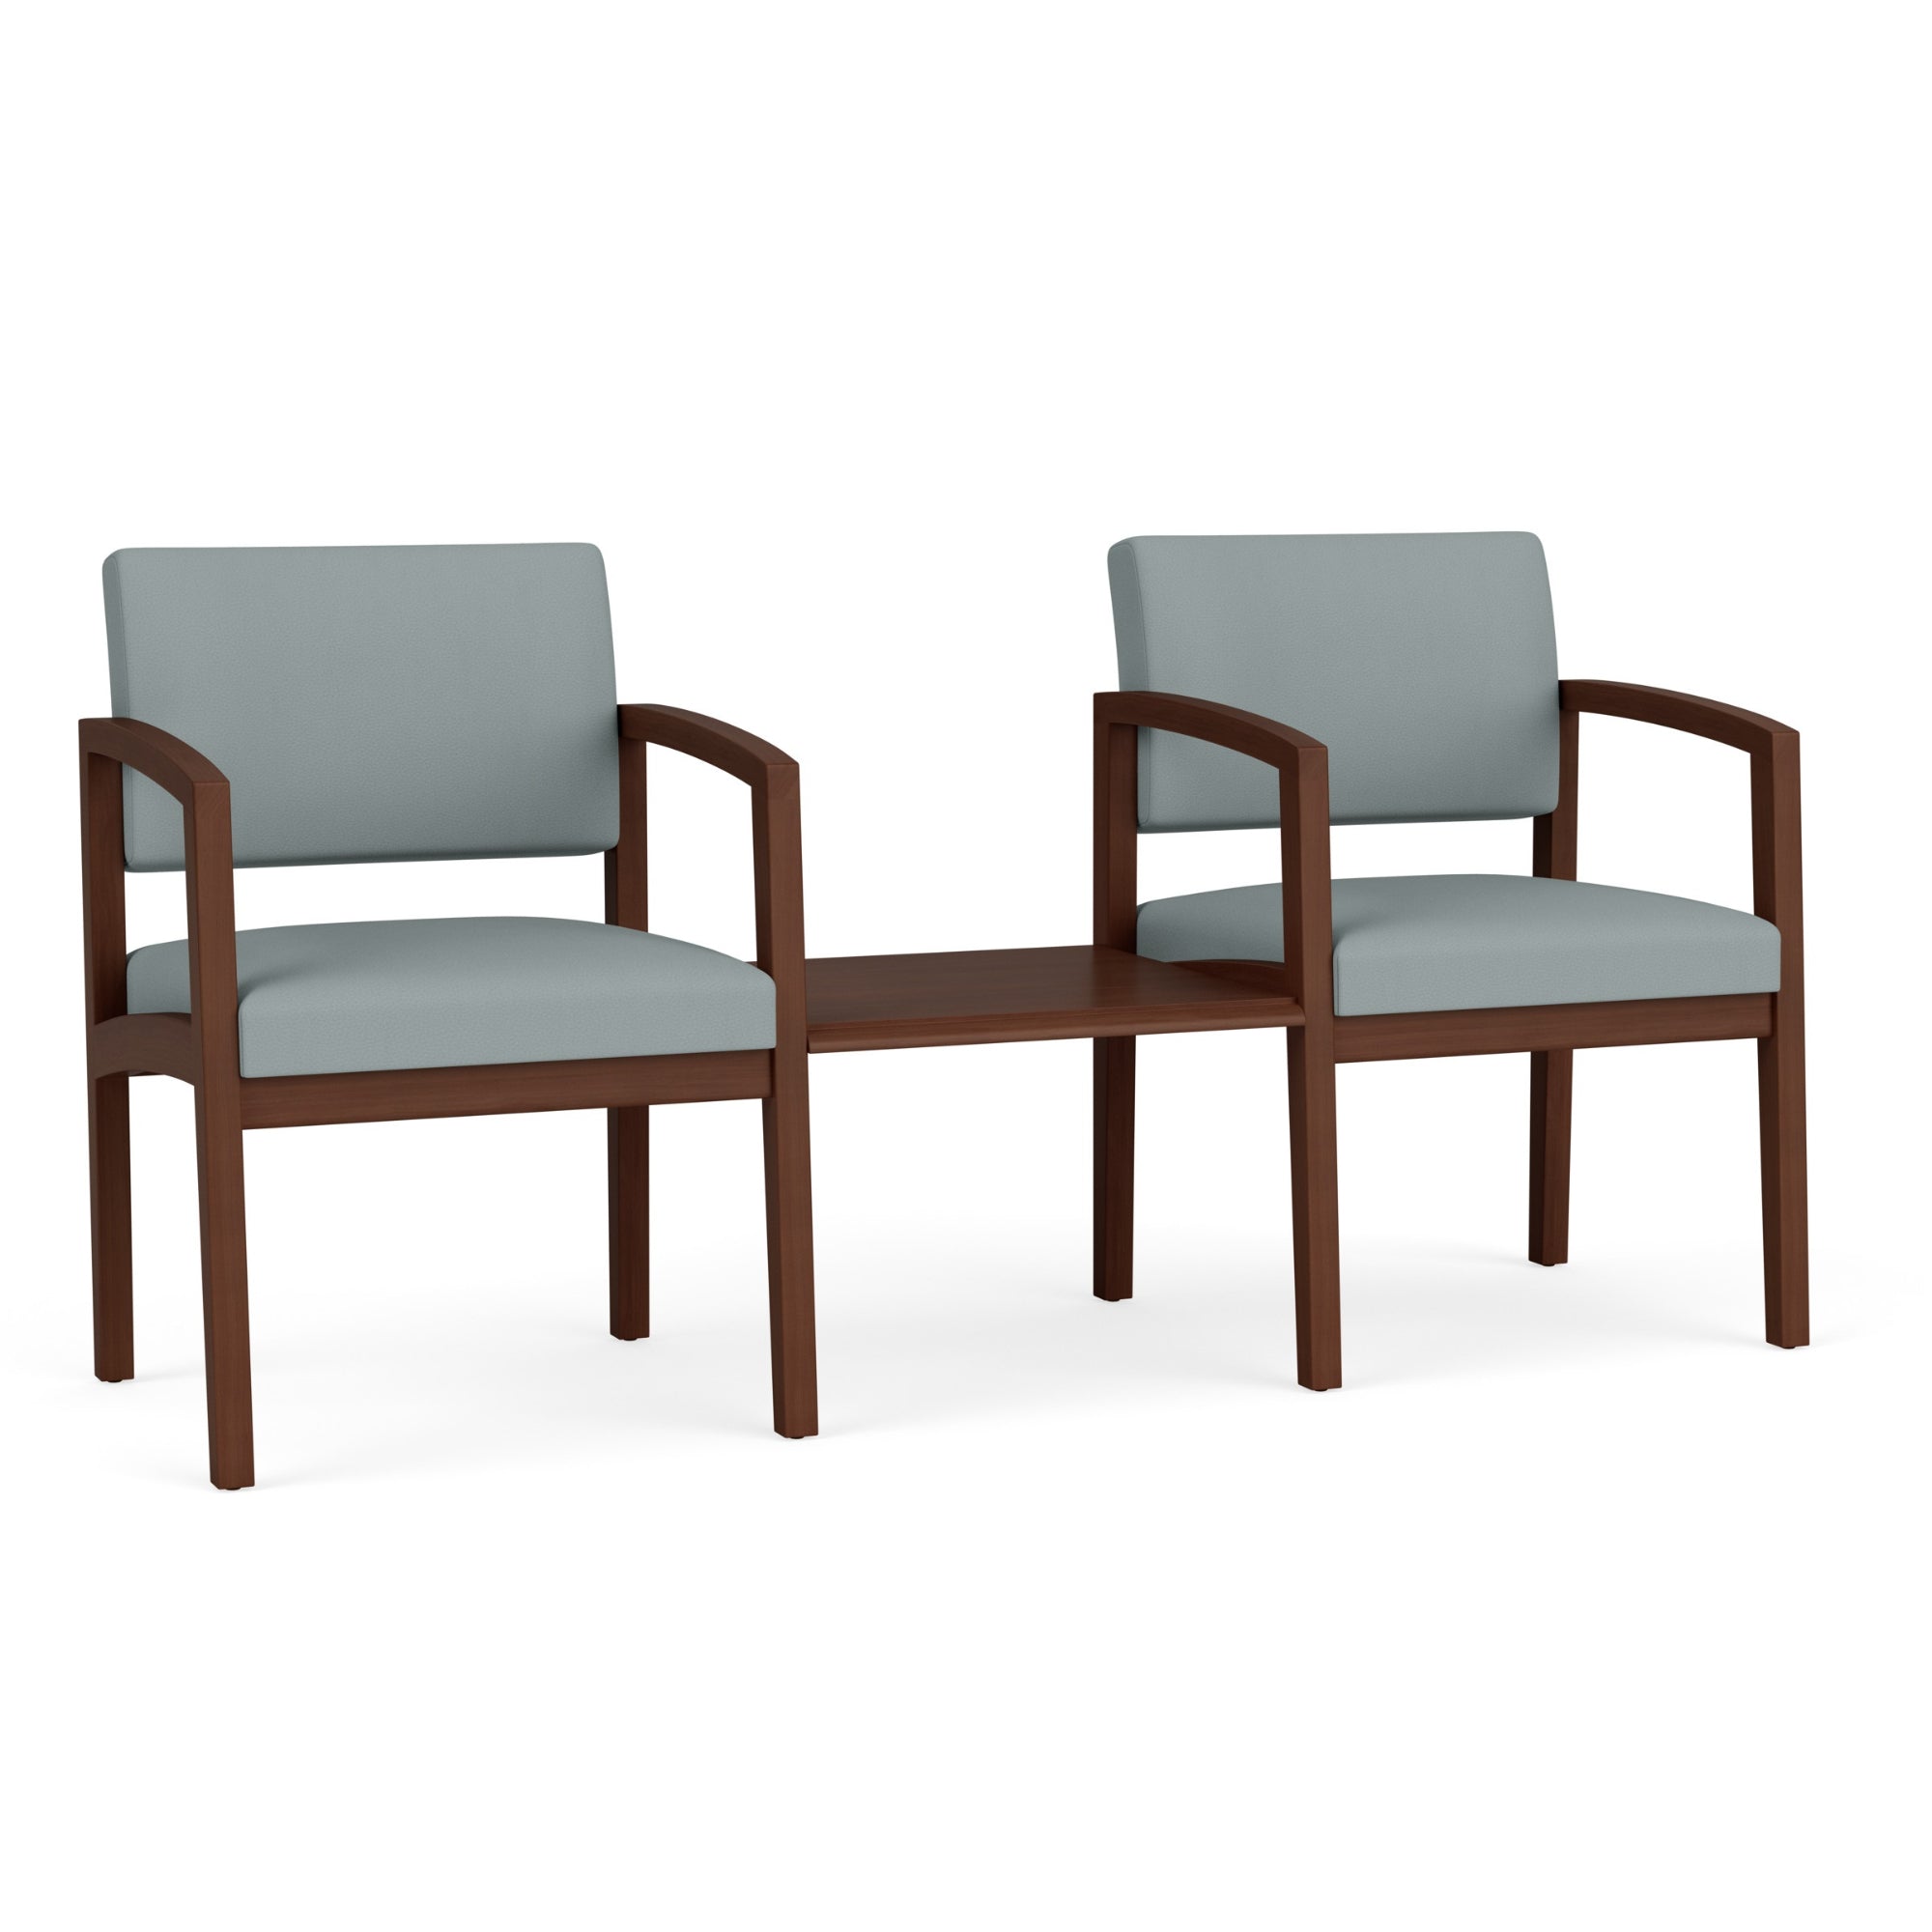 Lenox Wood Collection Reception Seating, 2 Chairs with Solid Wood Connecting Center Table, Designer Fabric Upholstery, FREE SHIPPING